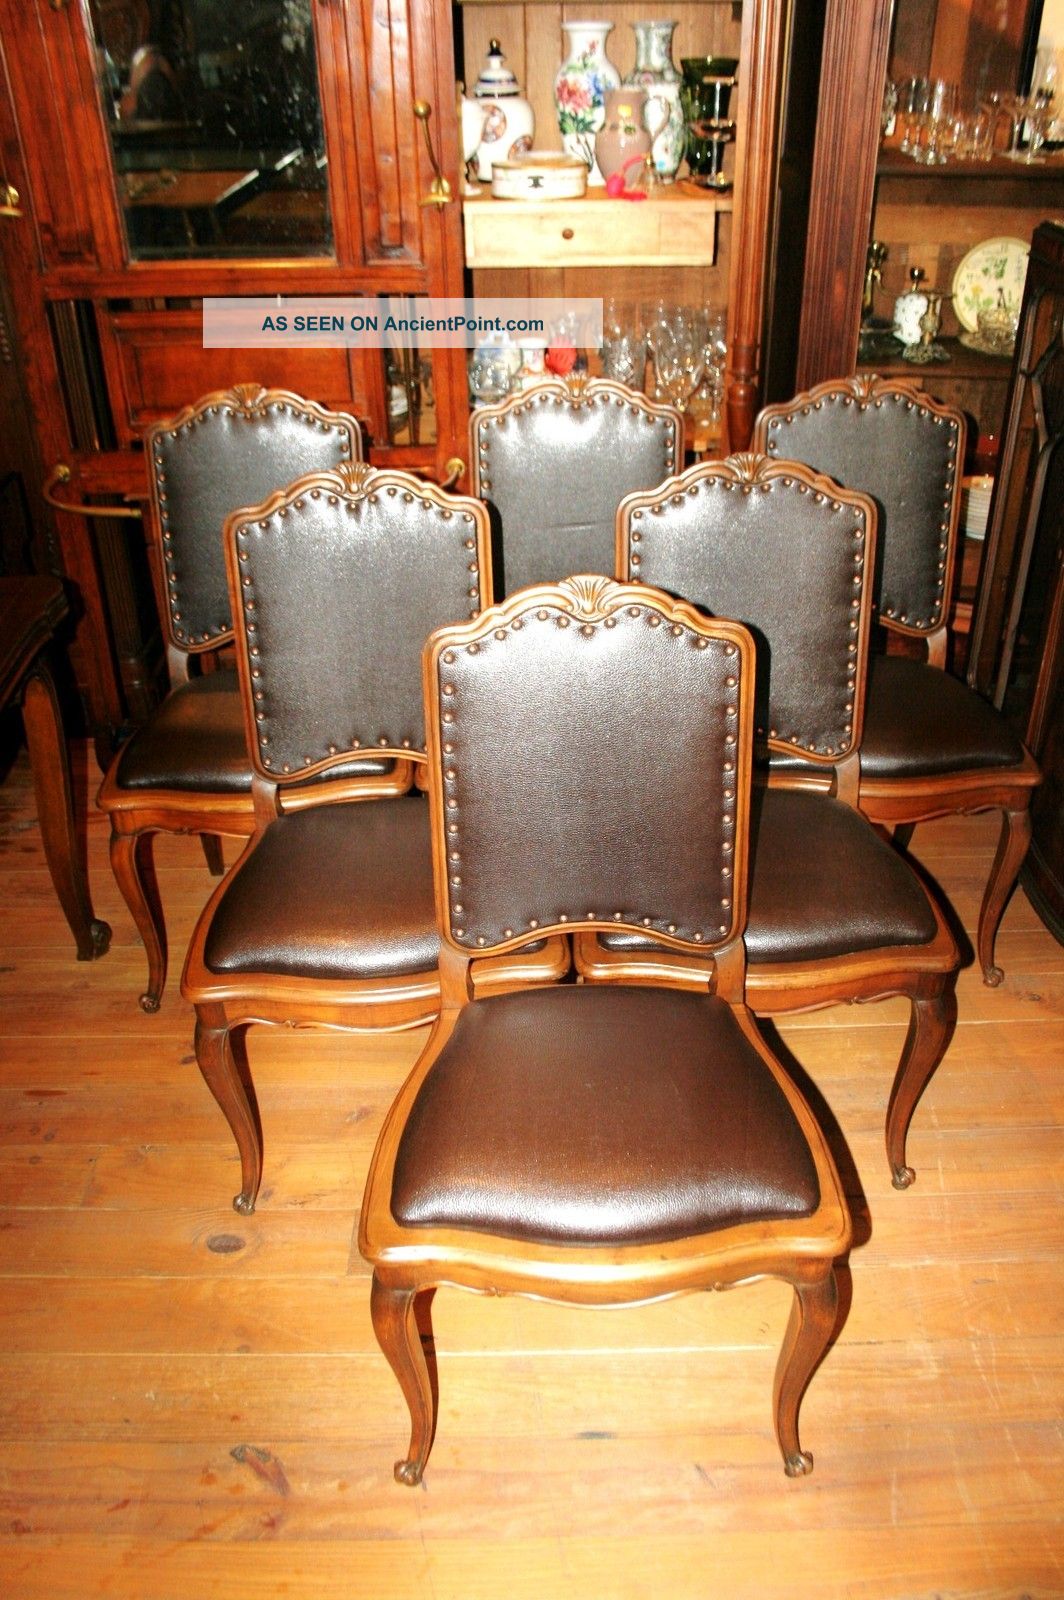 Exquisite French Atique Walnut Upholstered Louis Xv Chairs Circa 1880 ' S 1800-1899 photo